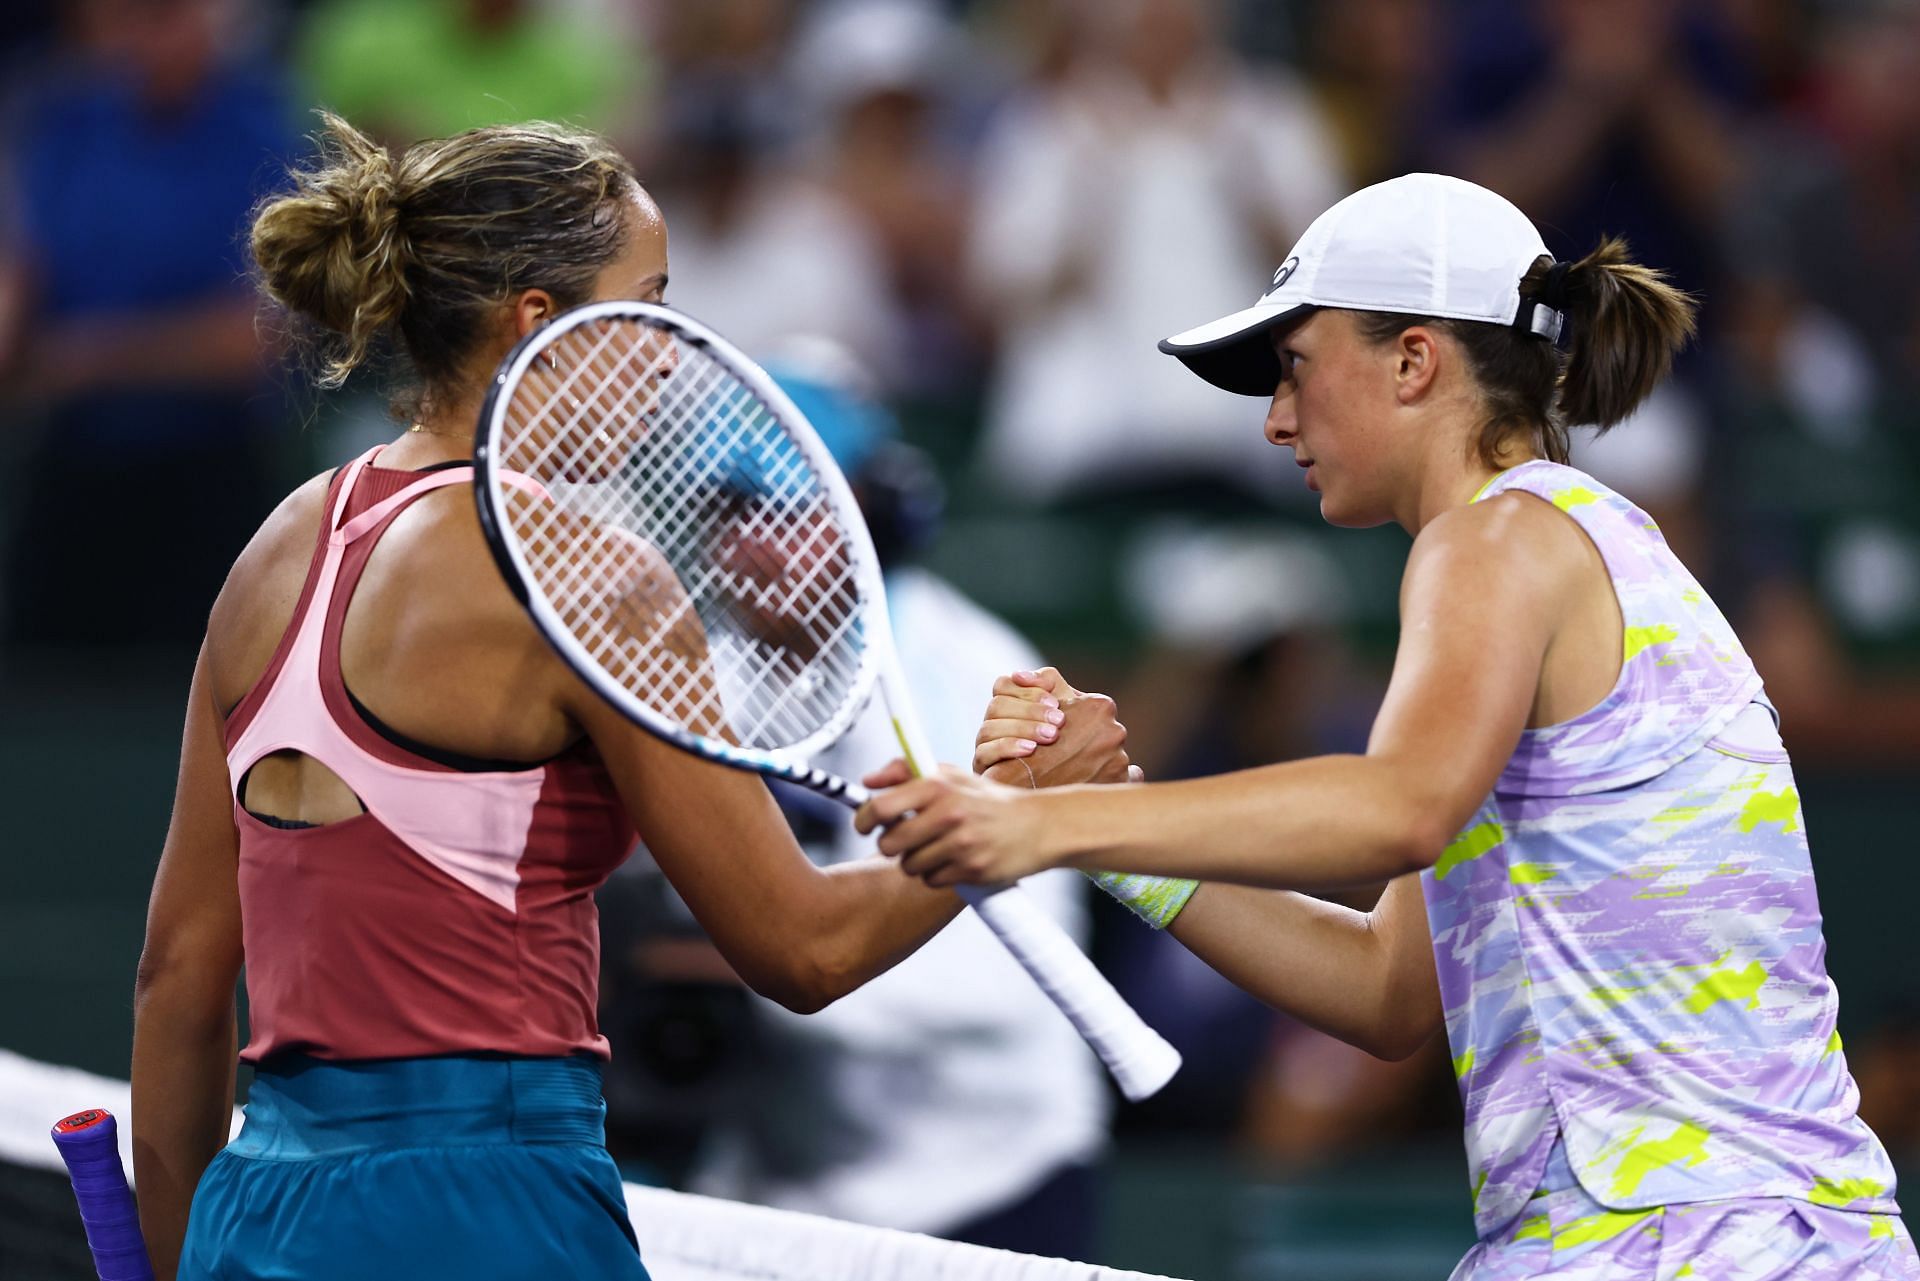 Iga Swiatek (R) shakes hands after her straight-sets victory over Madison Keys at the BNP Paribas Open